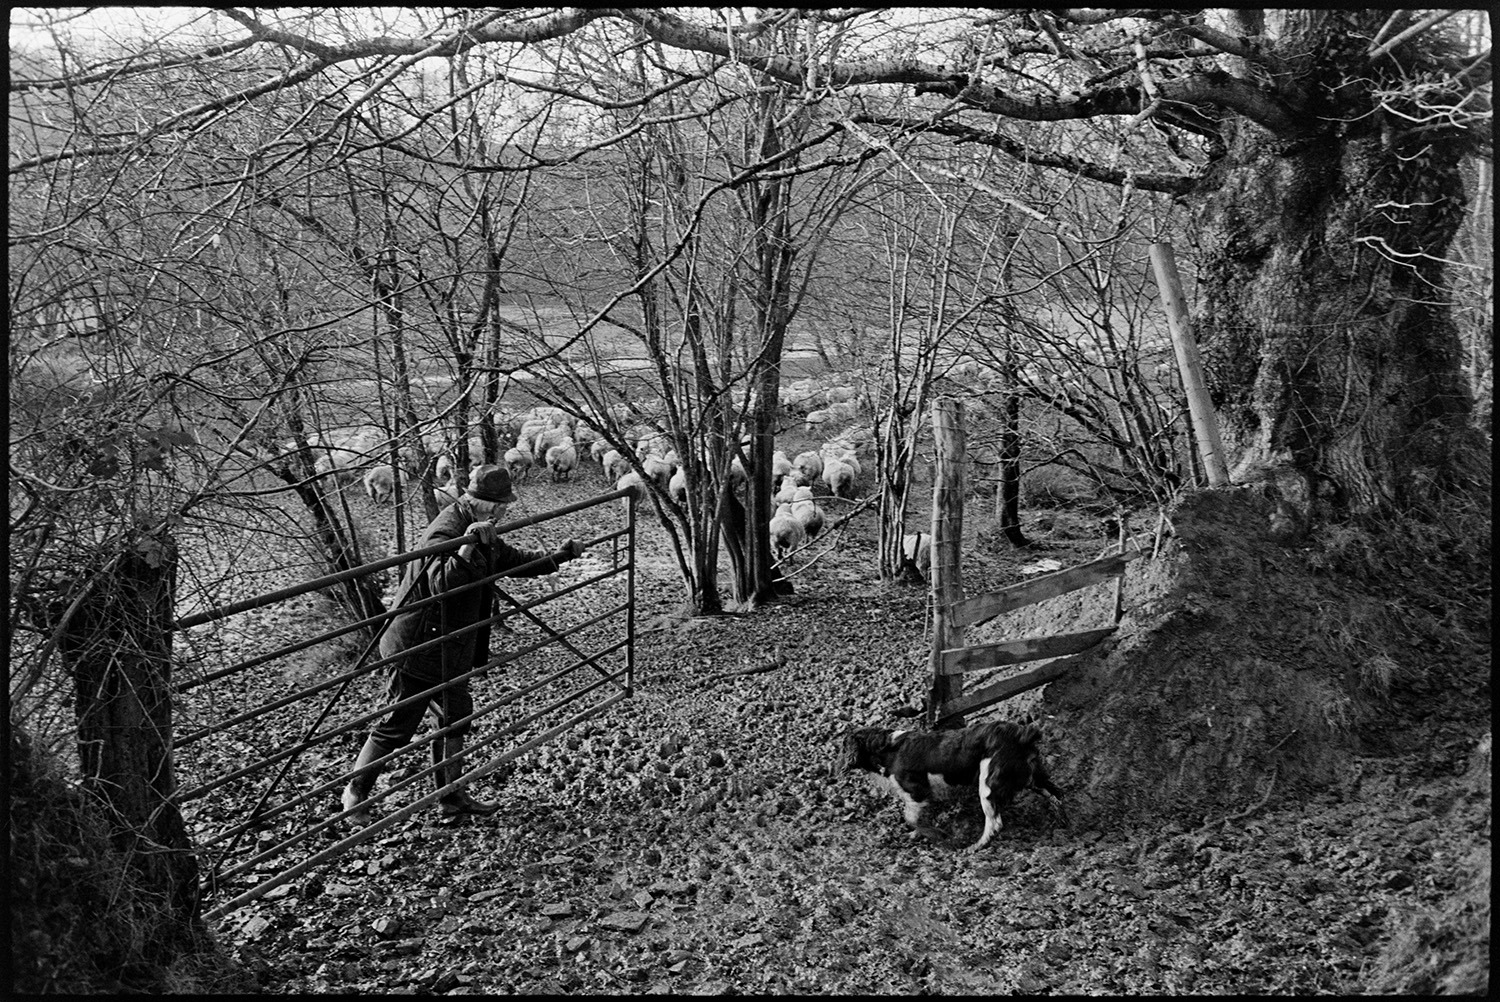 Farmer taking flock of sheep to new pasture. 
[Alan Berry closing a metal field gate at the muddy entrance to a field at Ashwell, Dolton. A dog is with him and a flock of sheep can be seen behind trees in the background.]